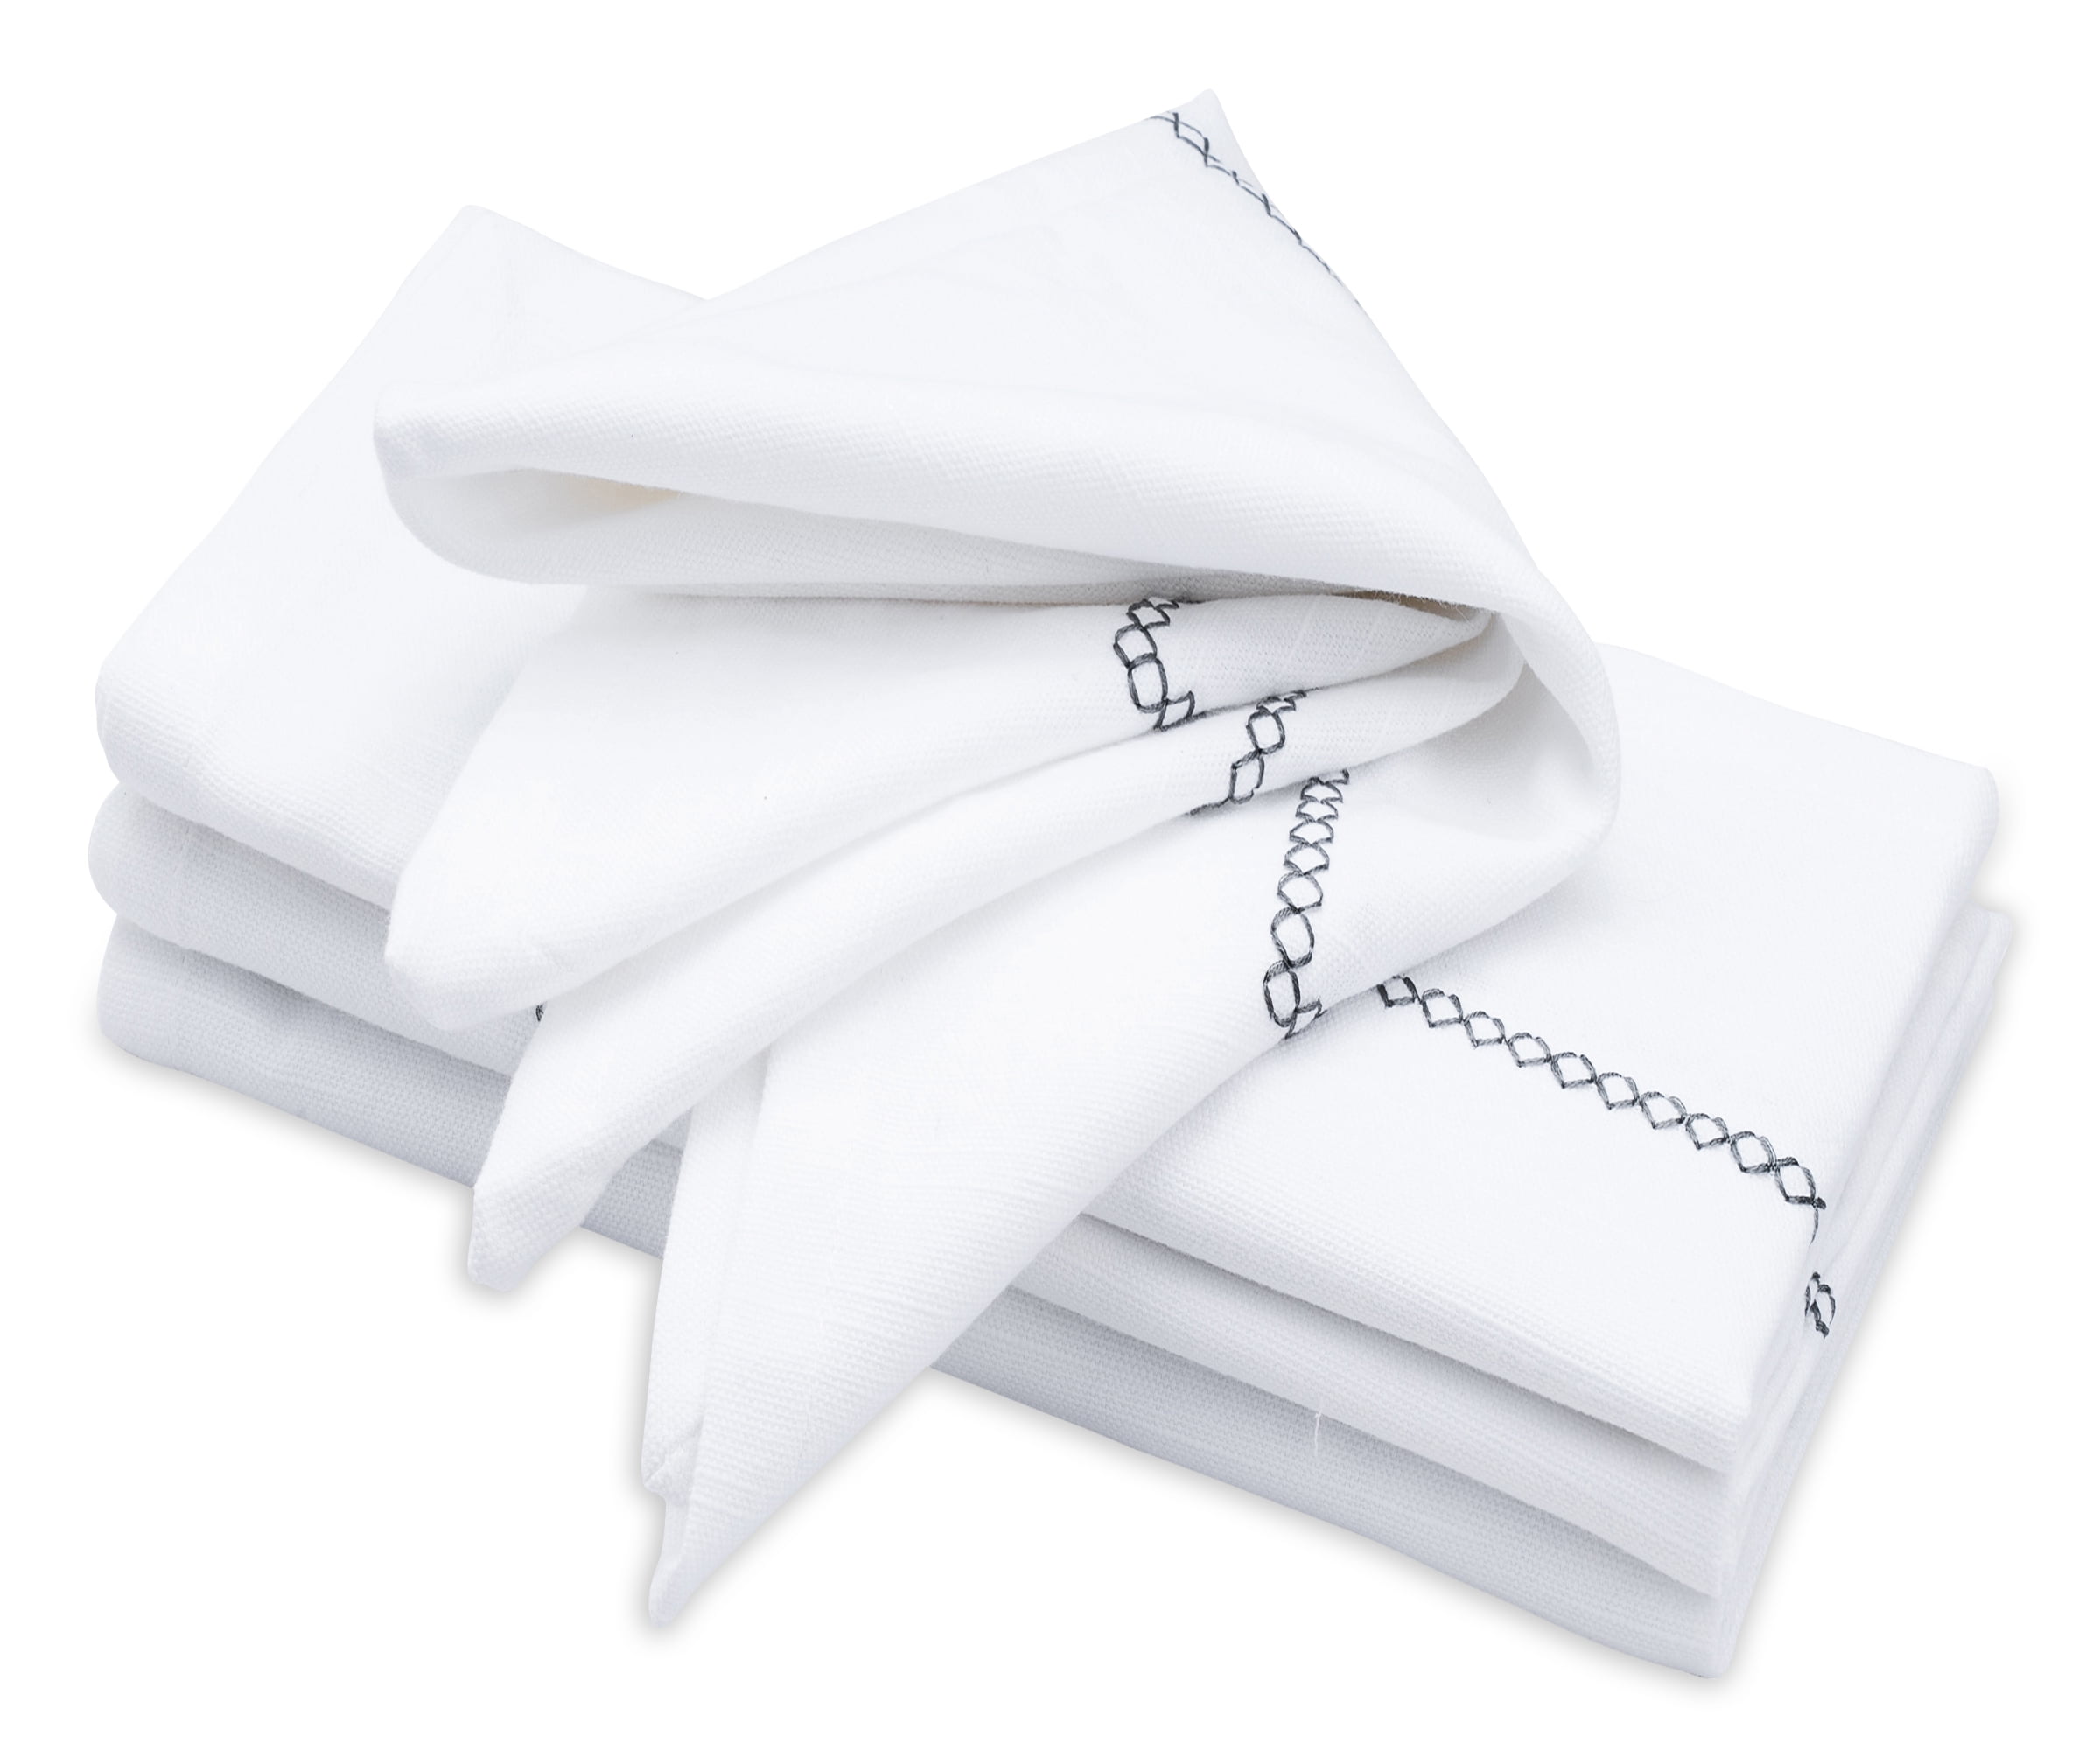 Faux Linen Napkins Set of 4, Wrinkle Free Washable Soft Fabric Textured  Cloth Napkins for Dining, Dinner, Party, Wedding, Holiday (4 Pack, 20 x 20